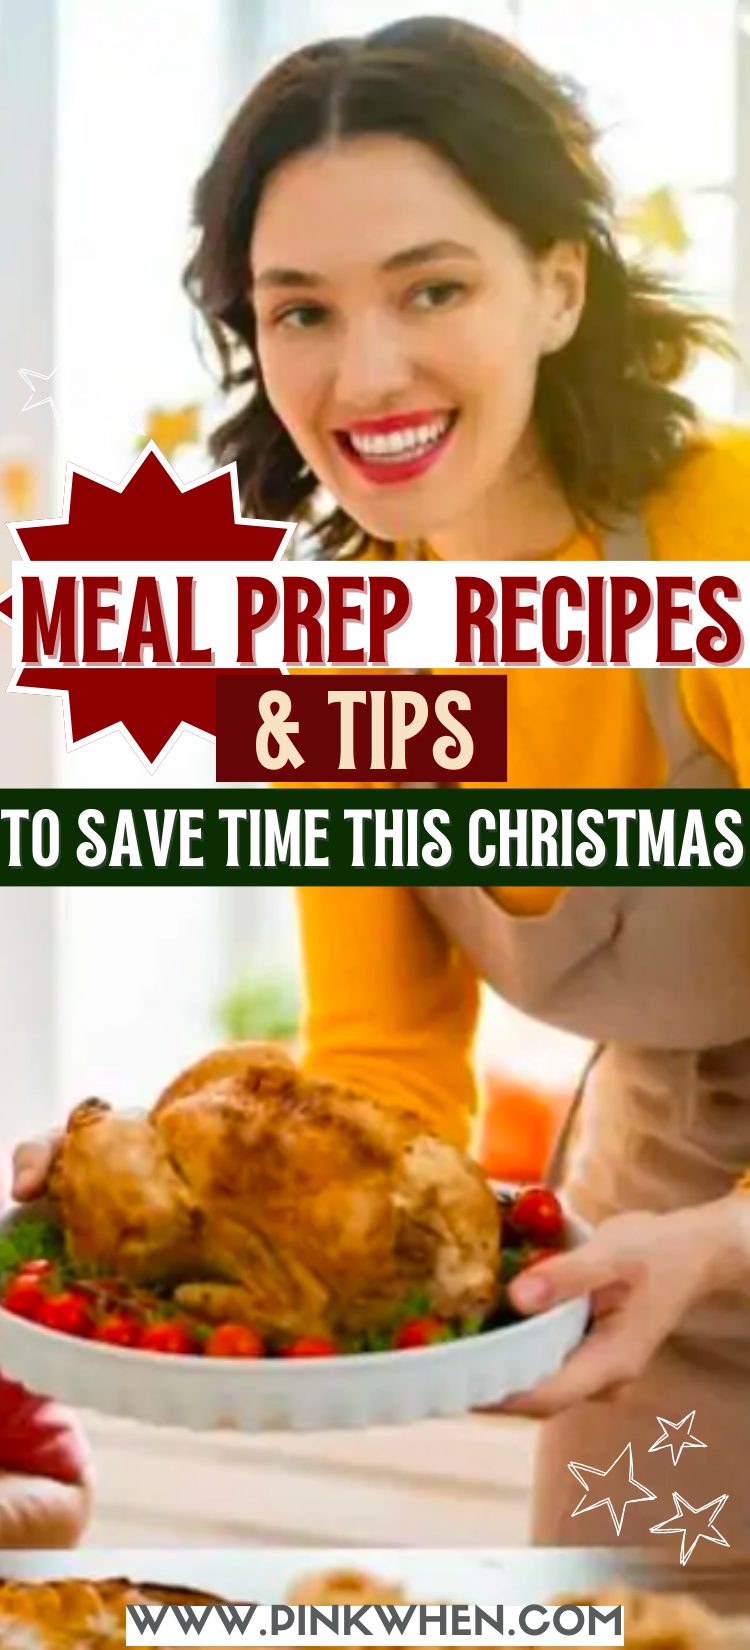 Meal Prep Recipes and Tips to Save Time This Christmas